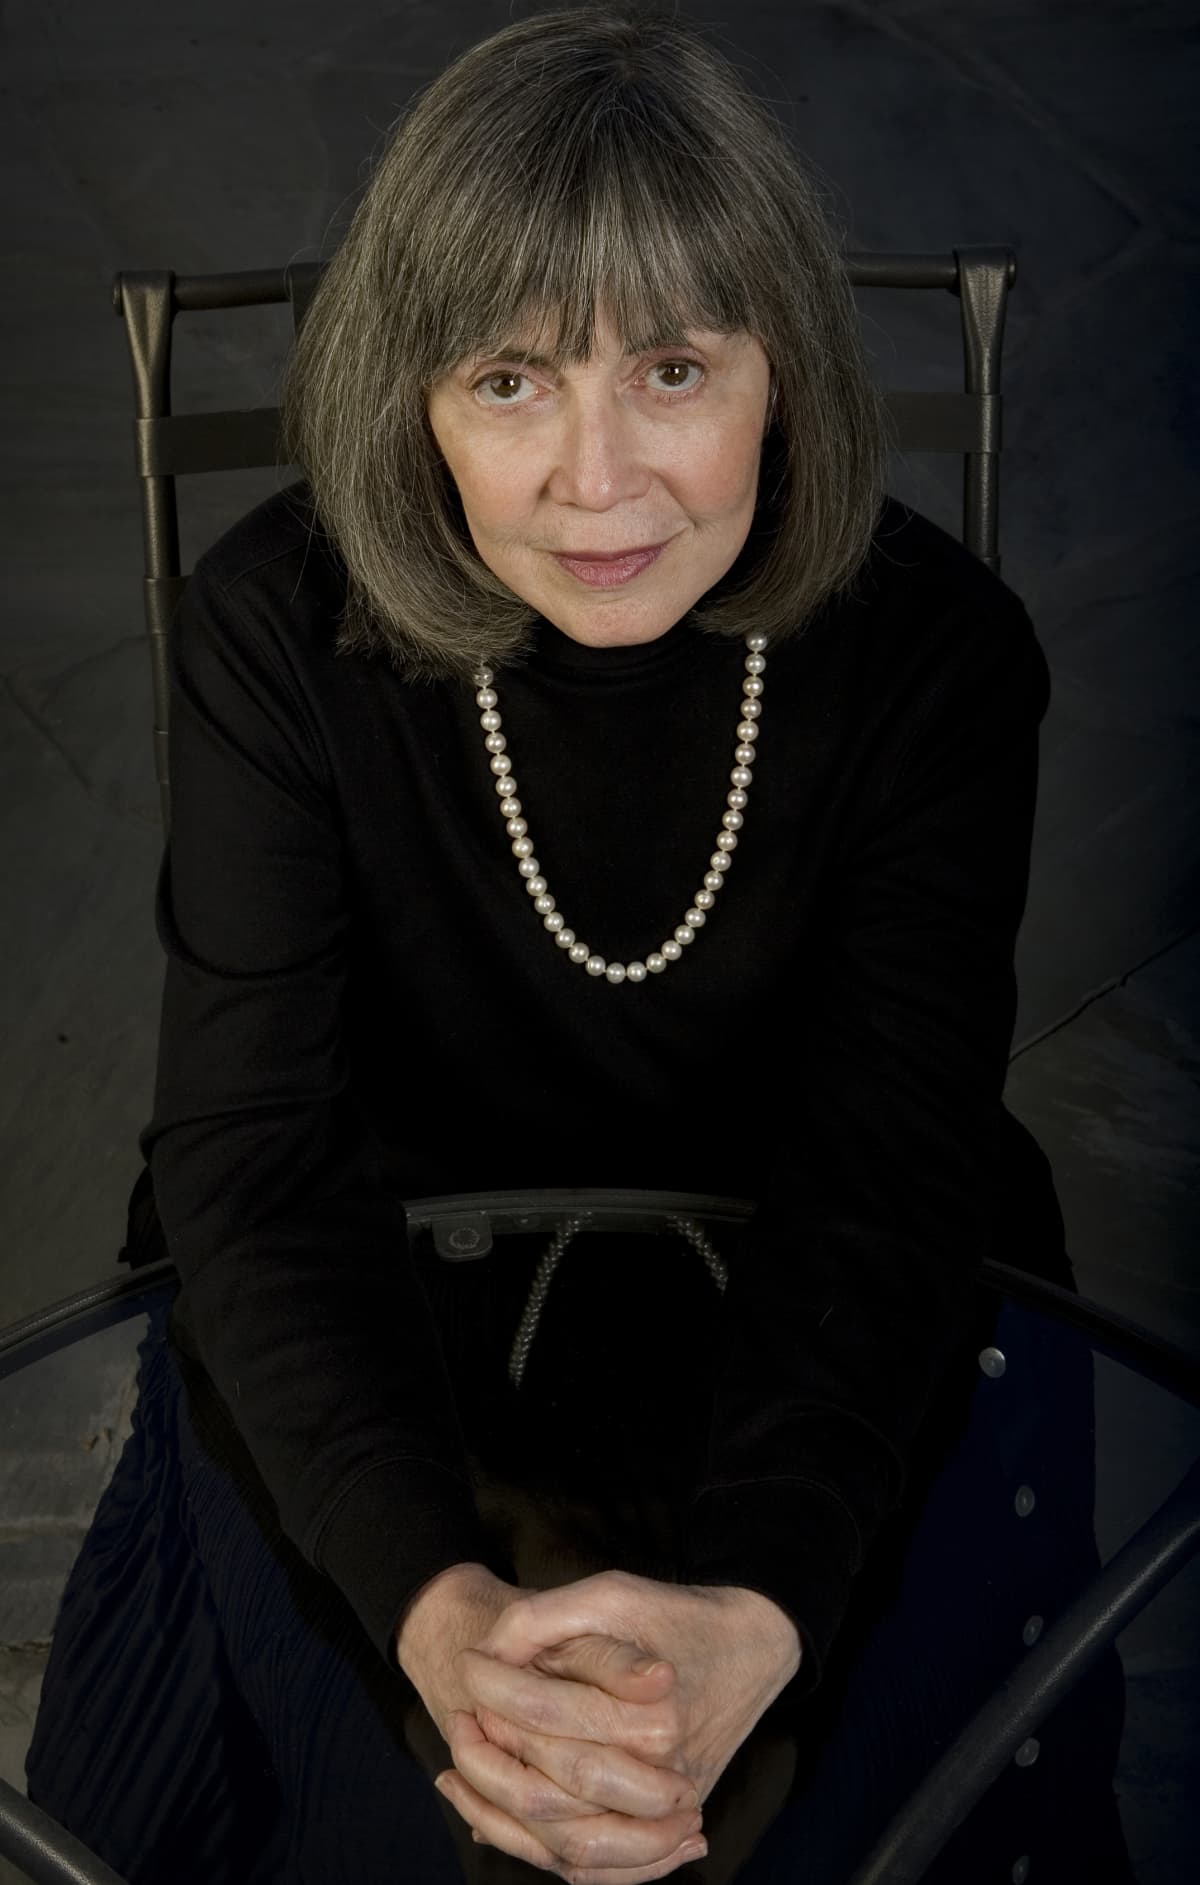 Anne Rice during Lestat Group Sales Events at the Winter Garden Theater - November 1, 2005 at Winter Garden Theater in New York City, New York, United States. (Photo by Derek Storm/FilmMagic)